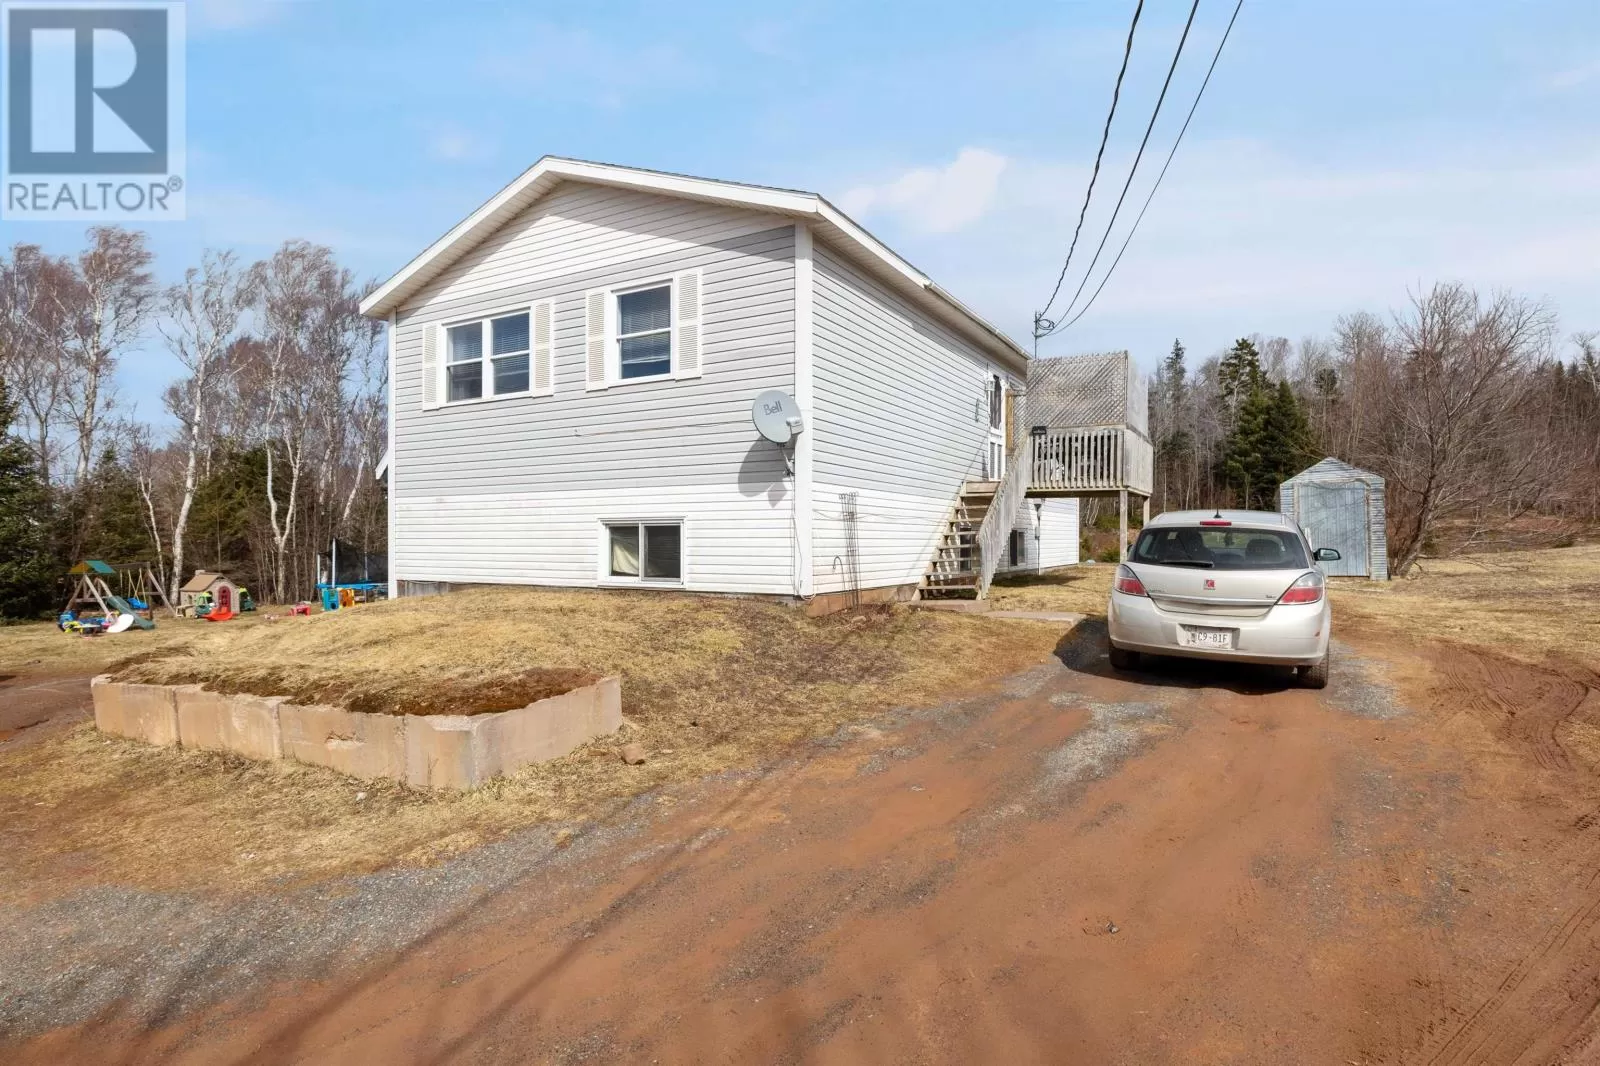 Duplex for rent: 5819/5821 Campbell Road|victoria Cross, Montague, Prince Edward Island C0A 1R0